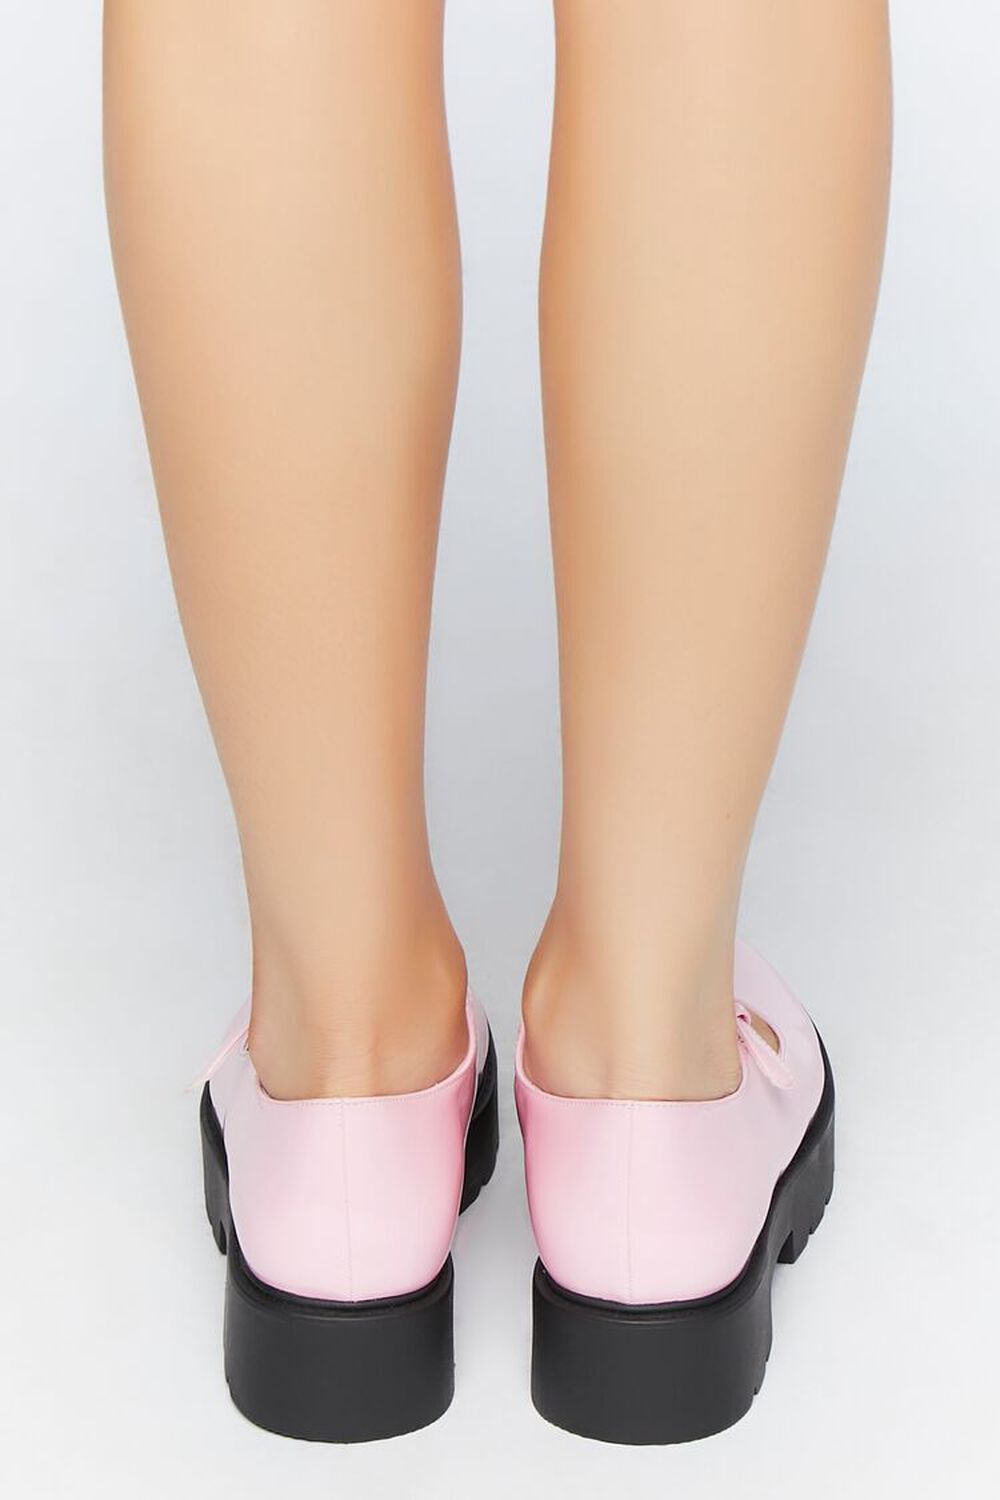 PINK Faux Patent Leather Mary Jane Flatforms, image 3